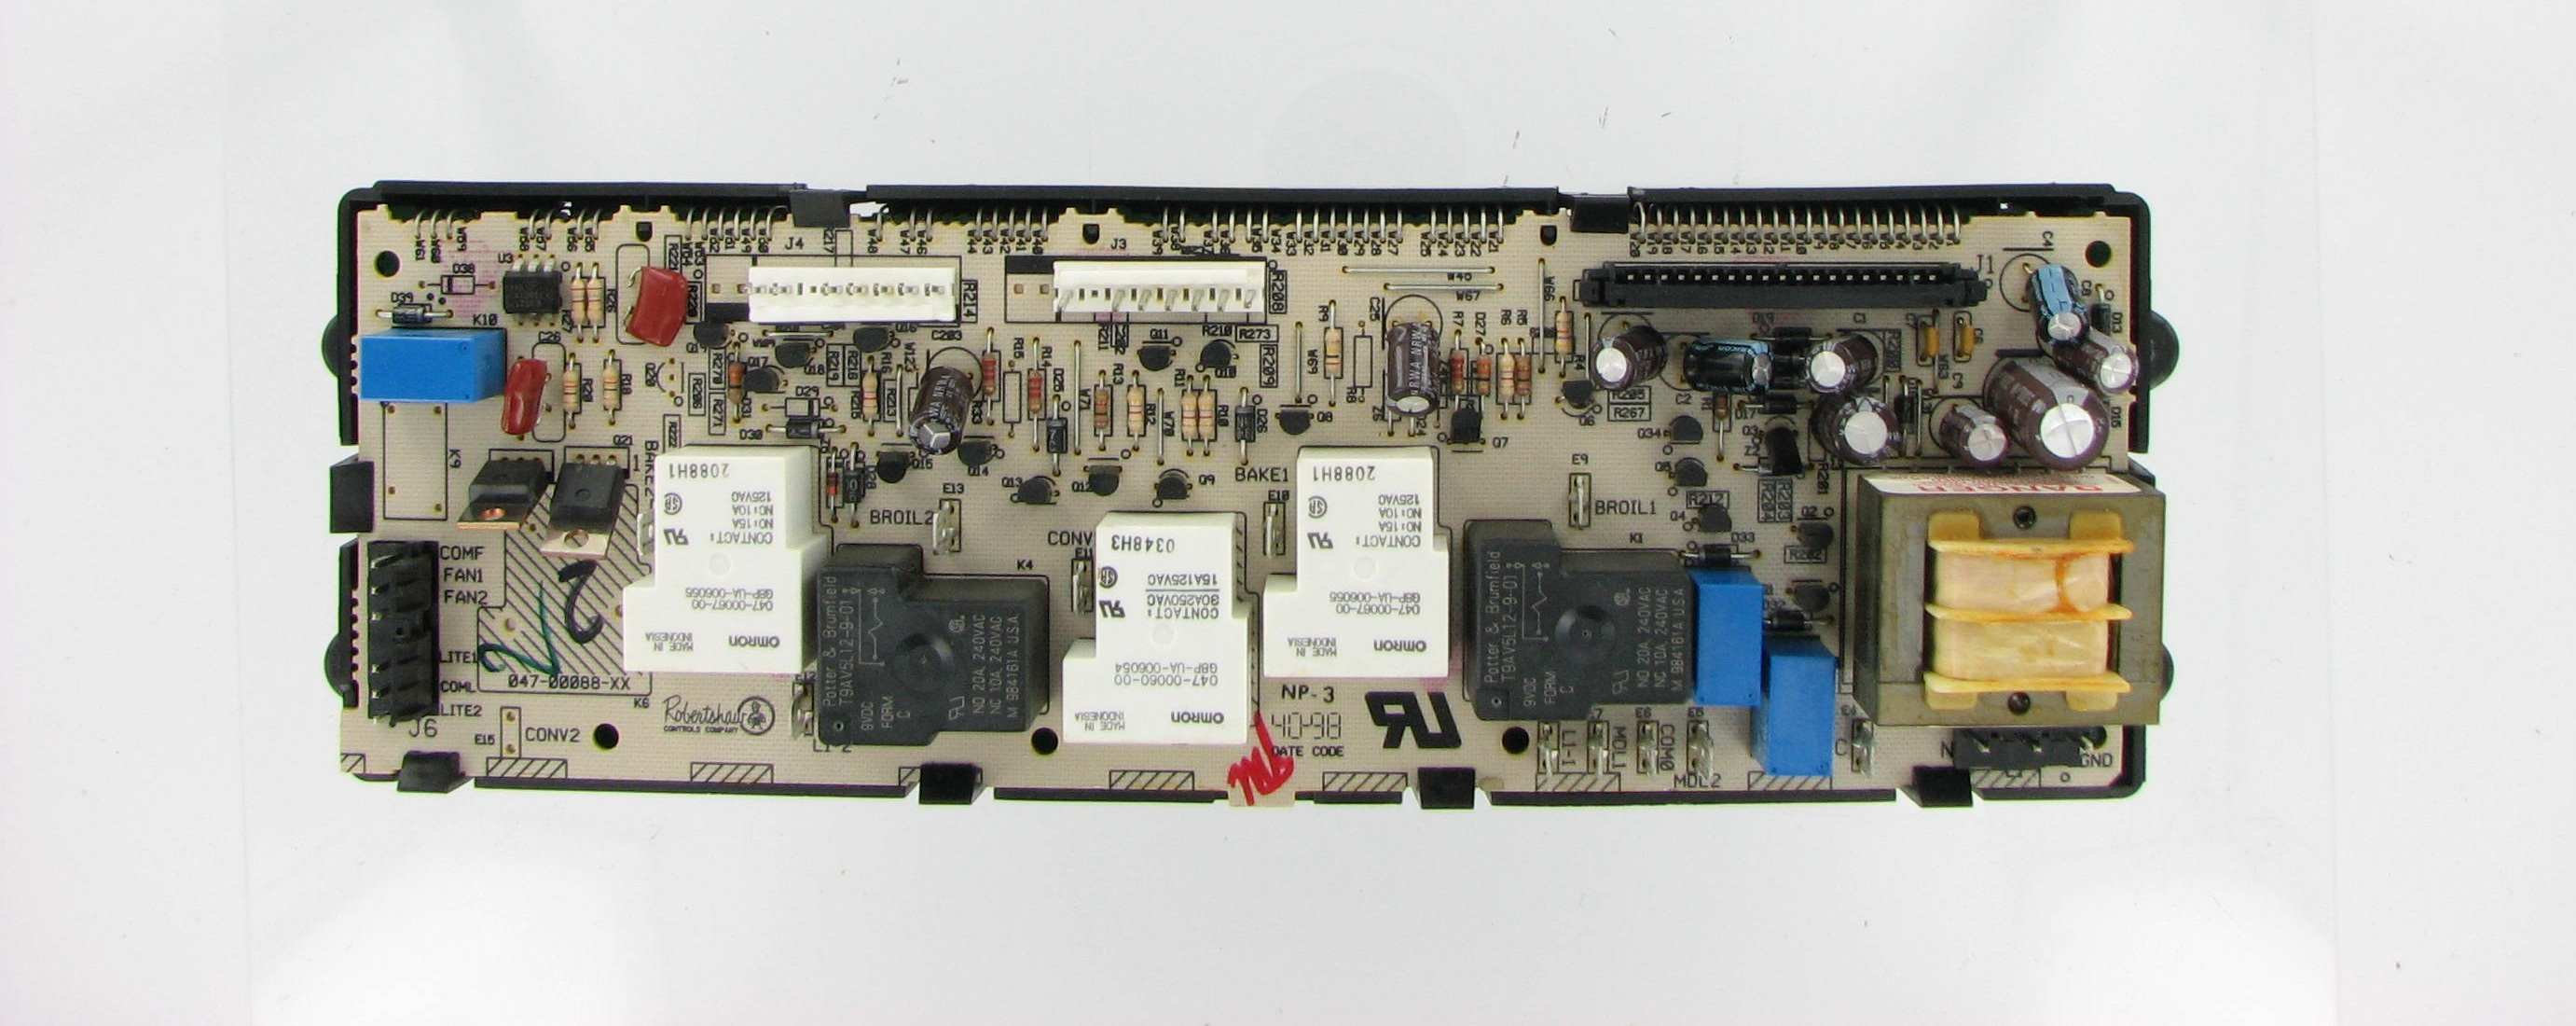 Range Control Board WB27T10287 Repair Service For GE Oven 